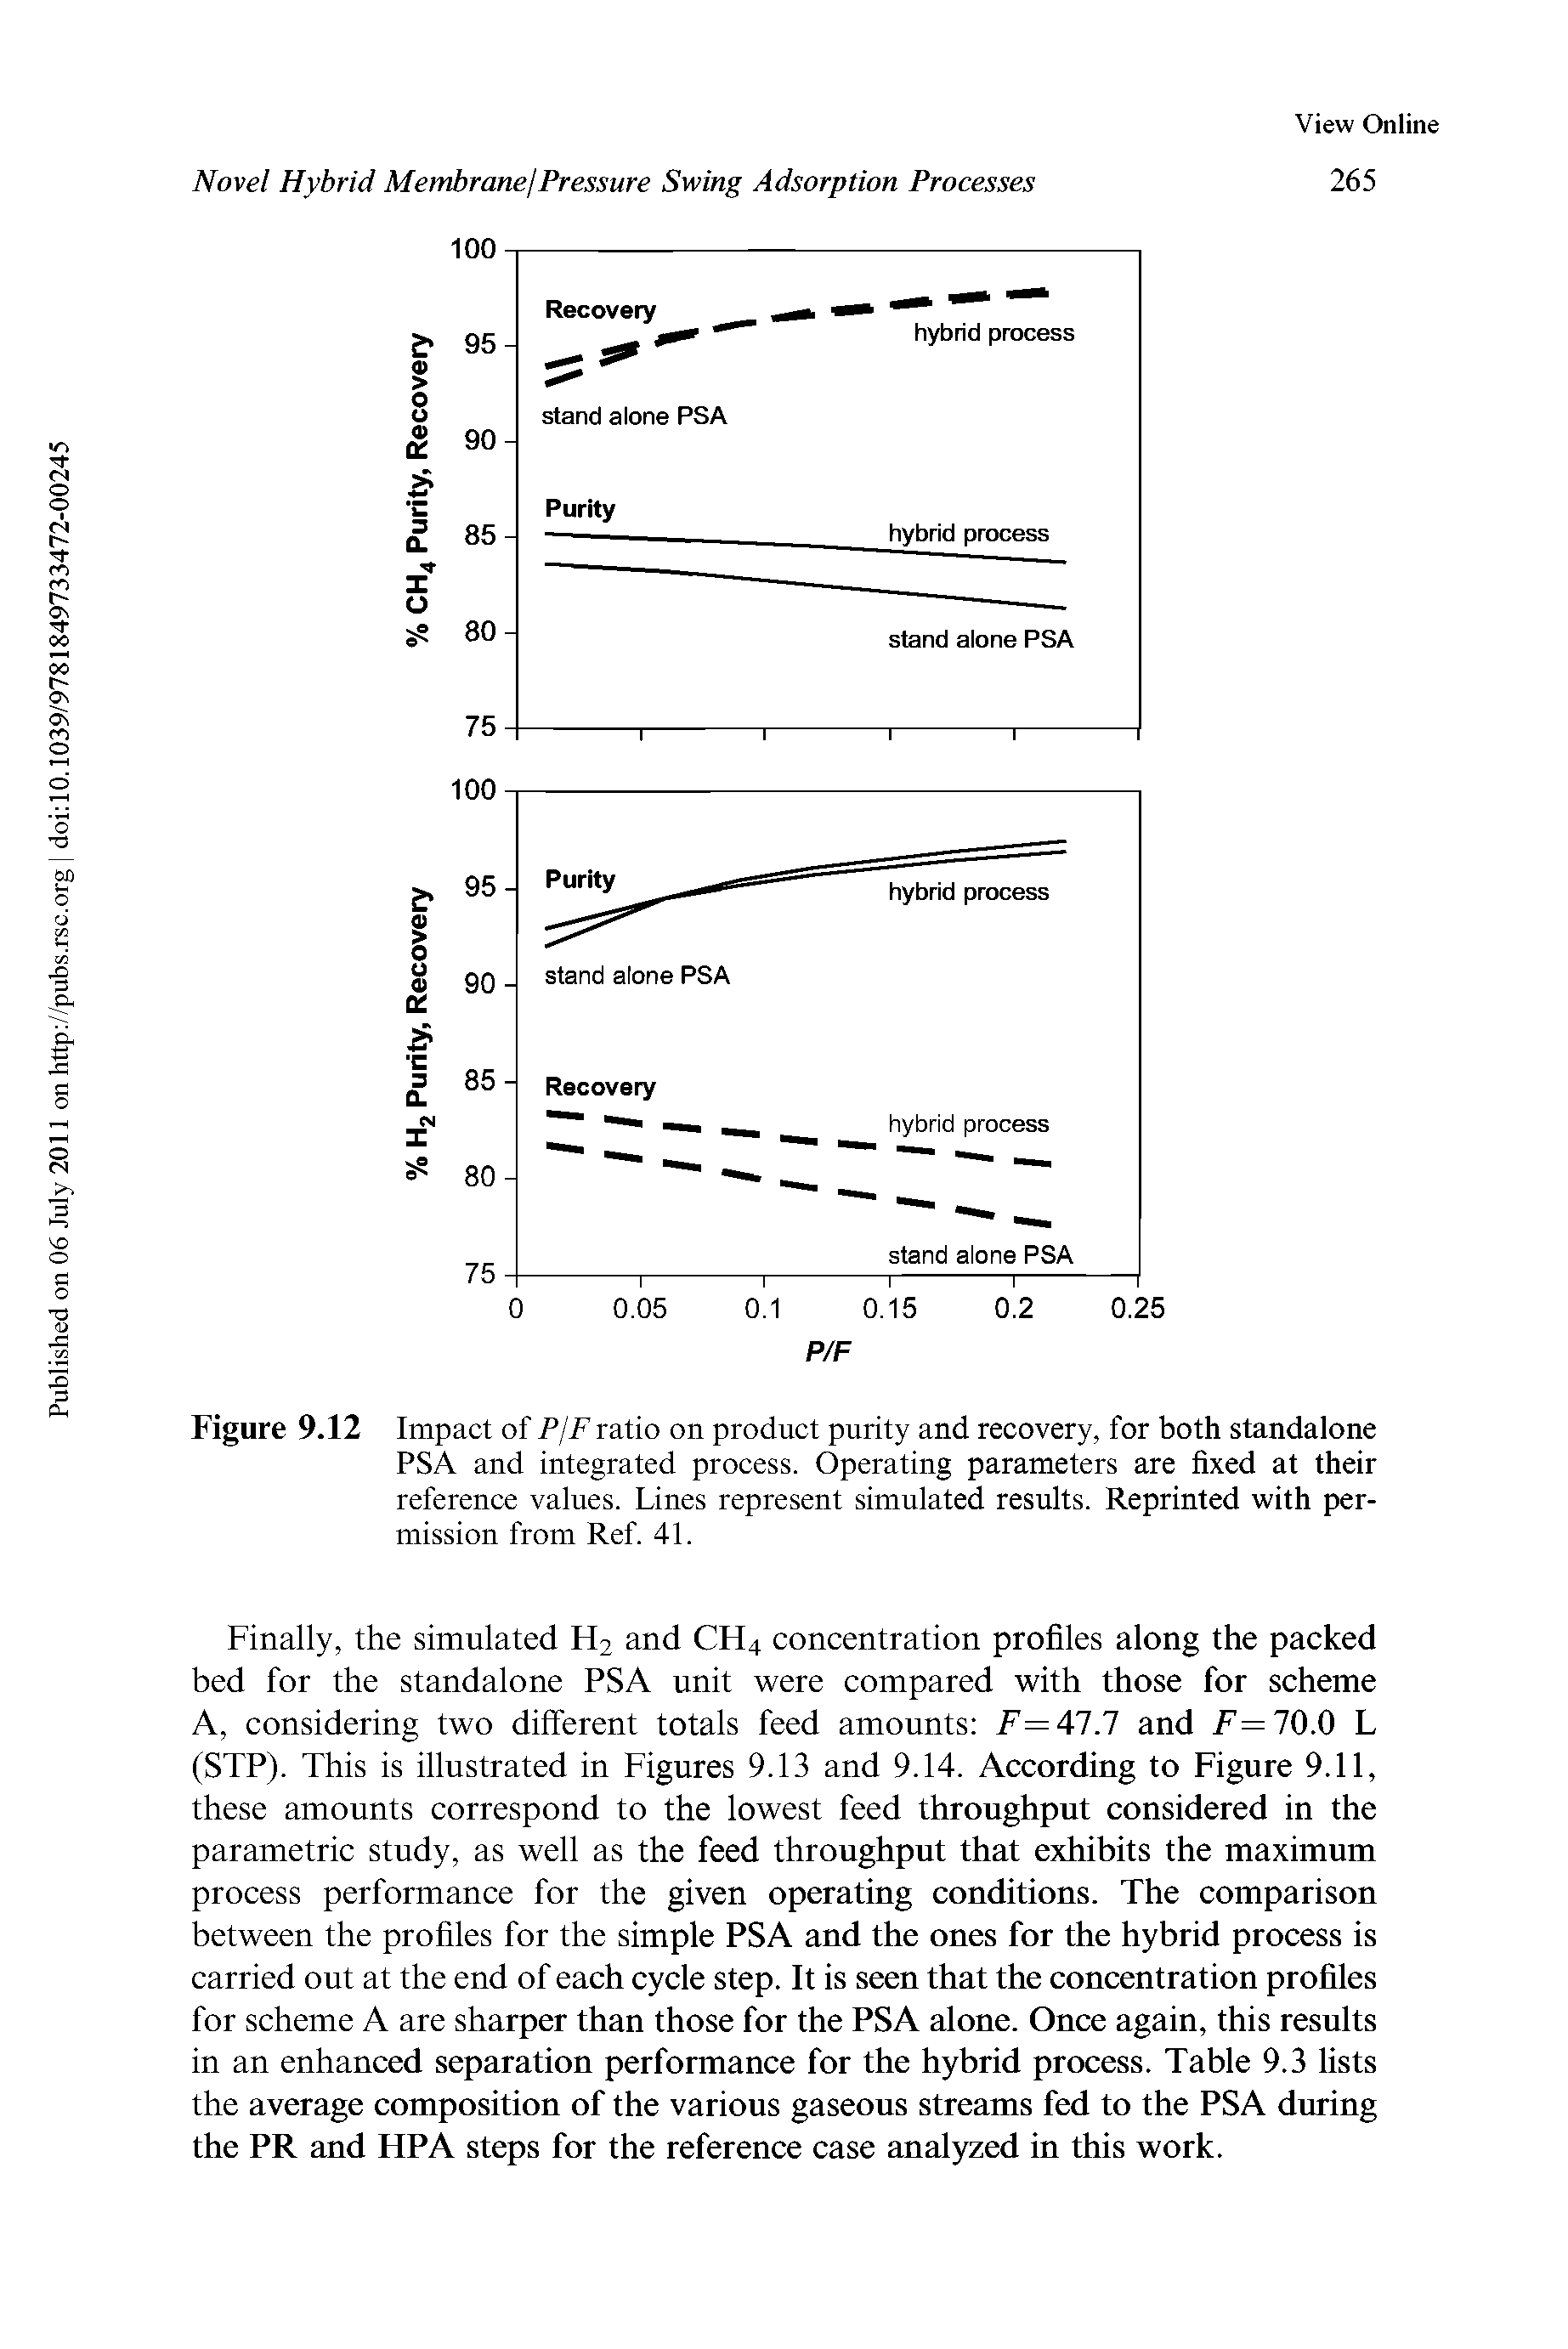 Figure 9.12 Impact of P/F ratio on product purity and recovery, for both standalone PSA and integrated process. Operating parameters are fixed at their reference values. Lines represent simulated results. Reprinted with permission from Ref. 41.